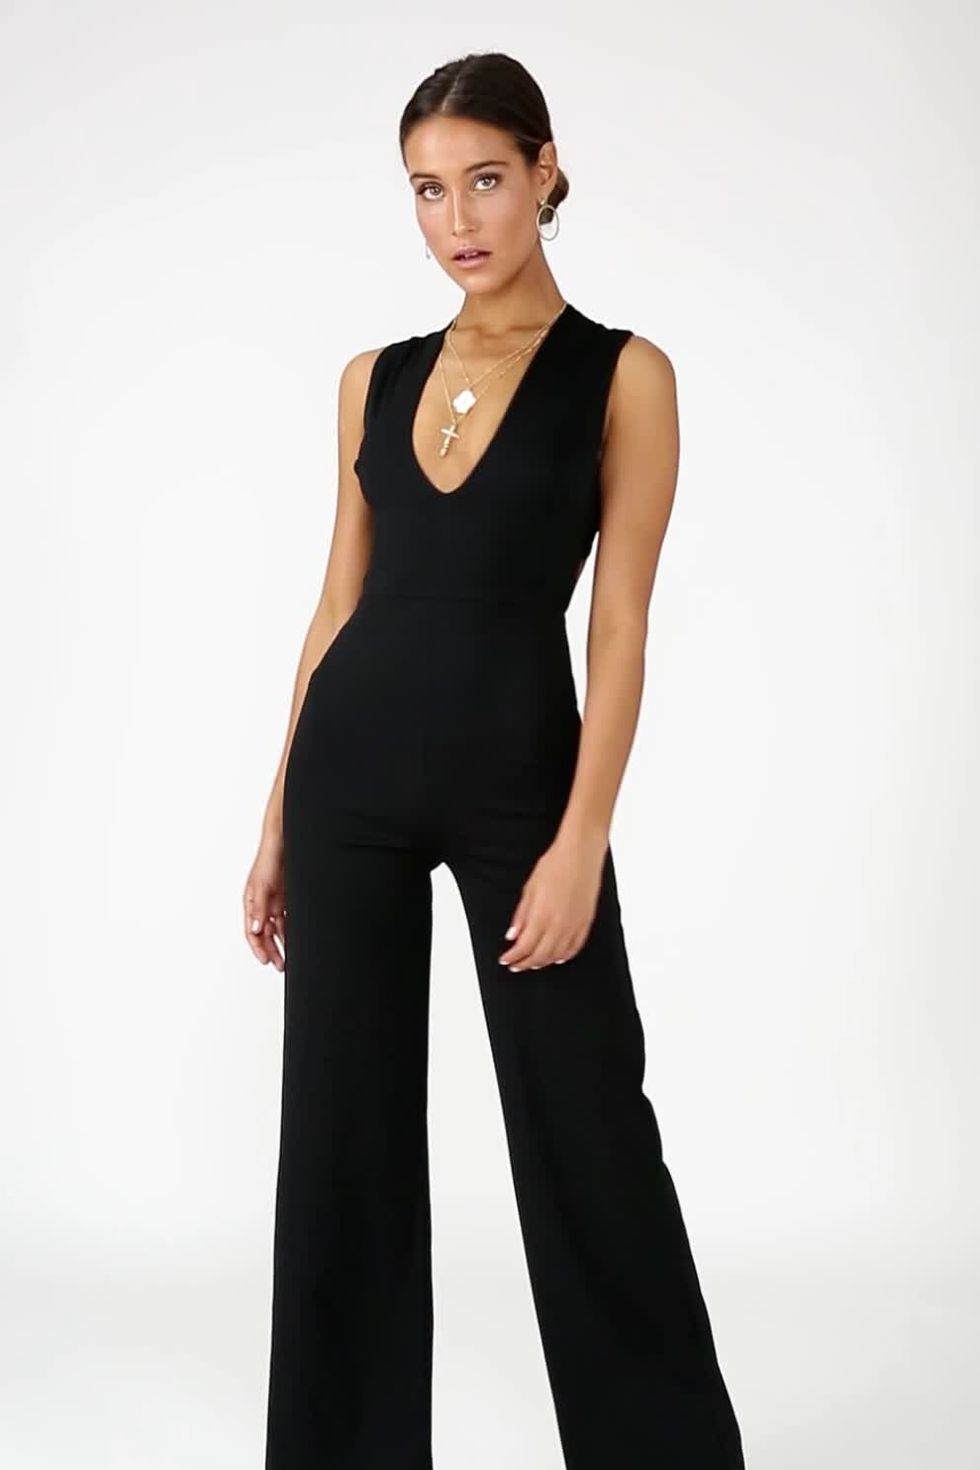 This $28 Size-Inclusive Jumpsuit Is a Top-Rated  Favorite